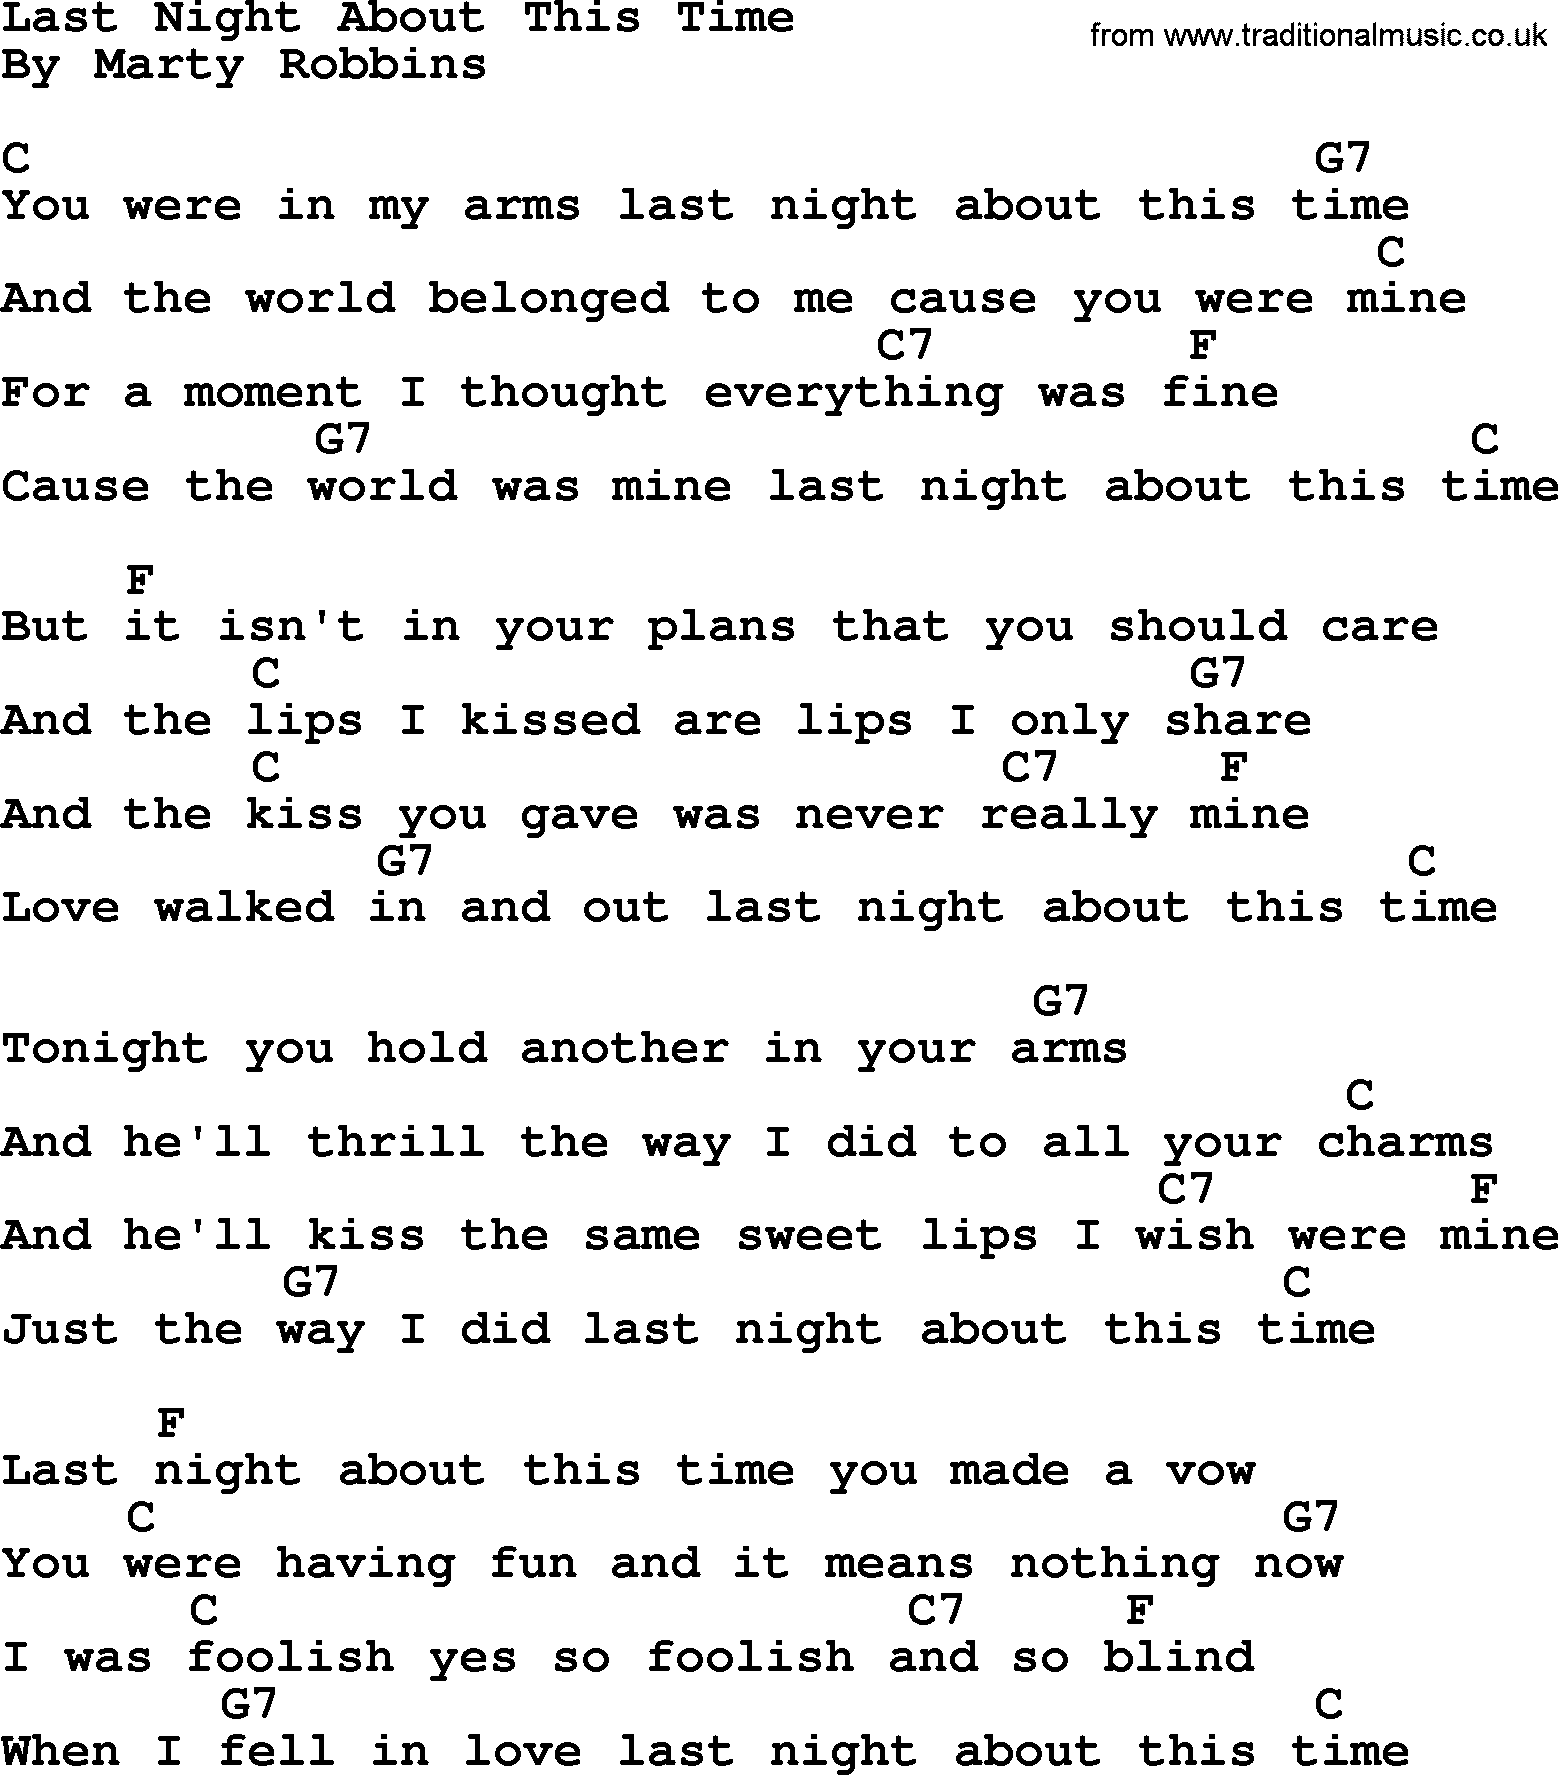 Marty Robbins song: Last Night About This Time, lyrics and chords